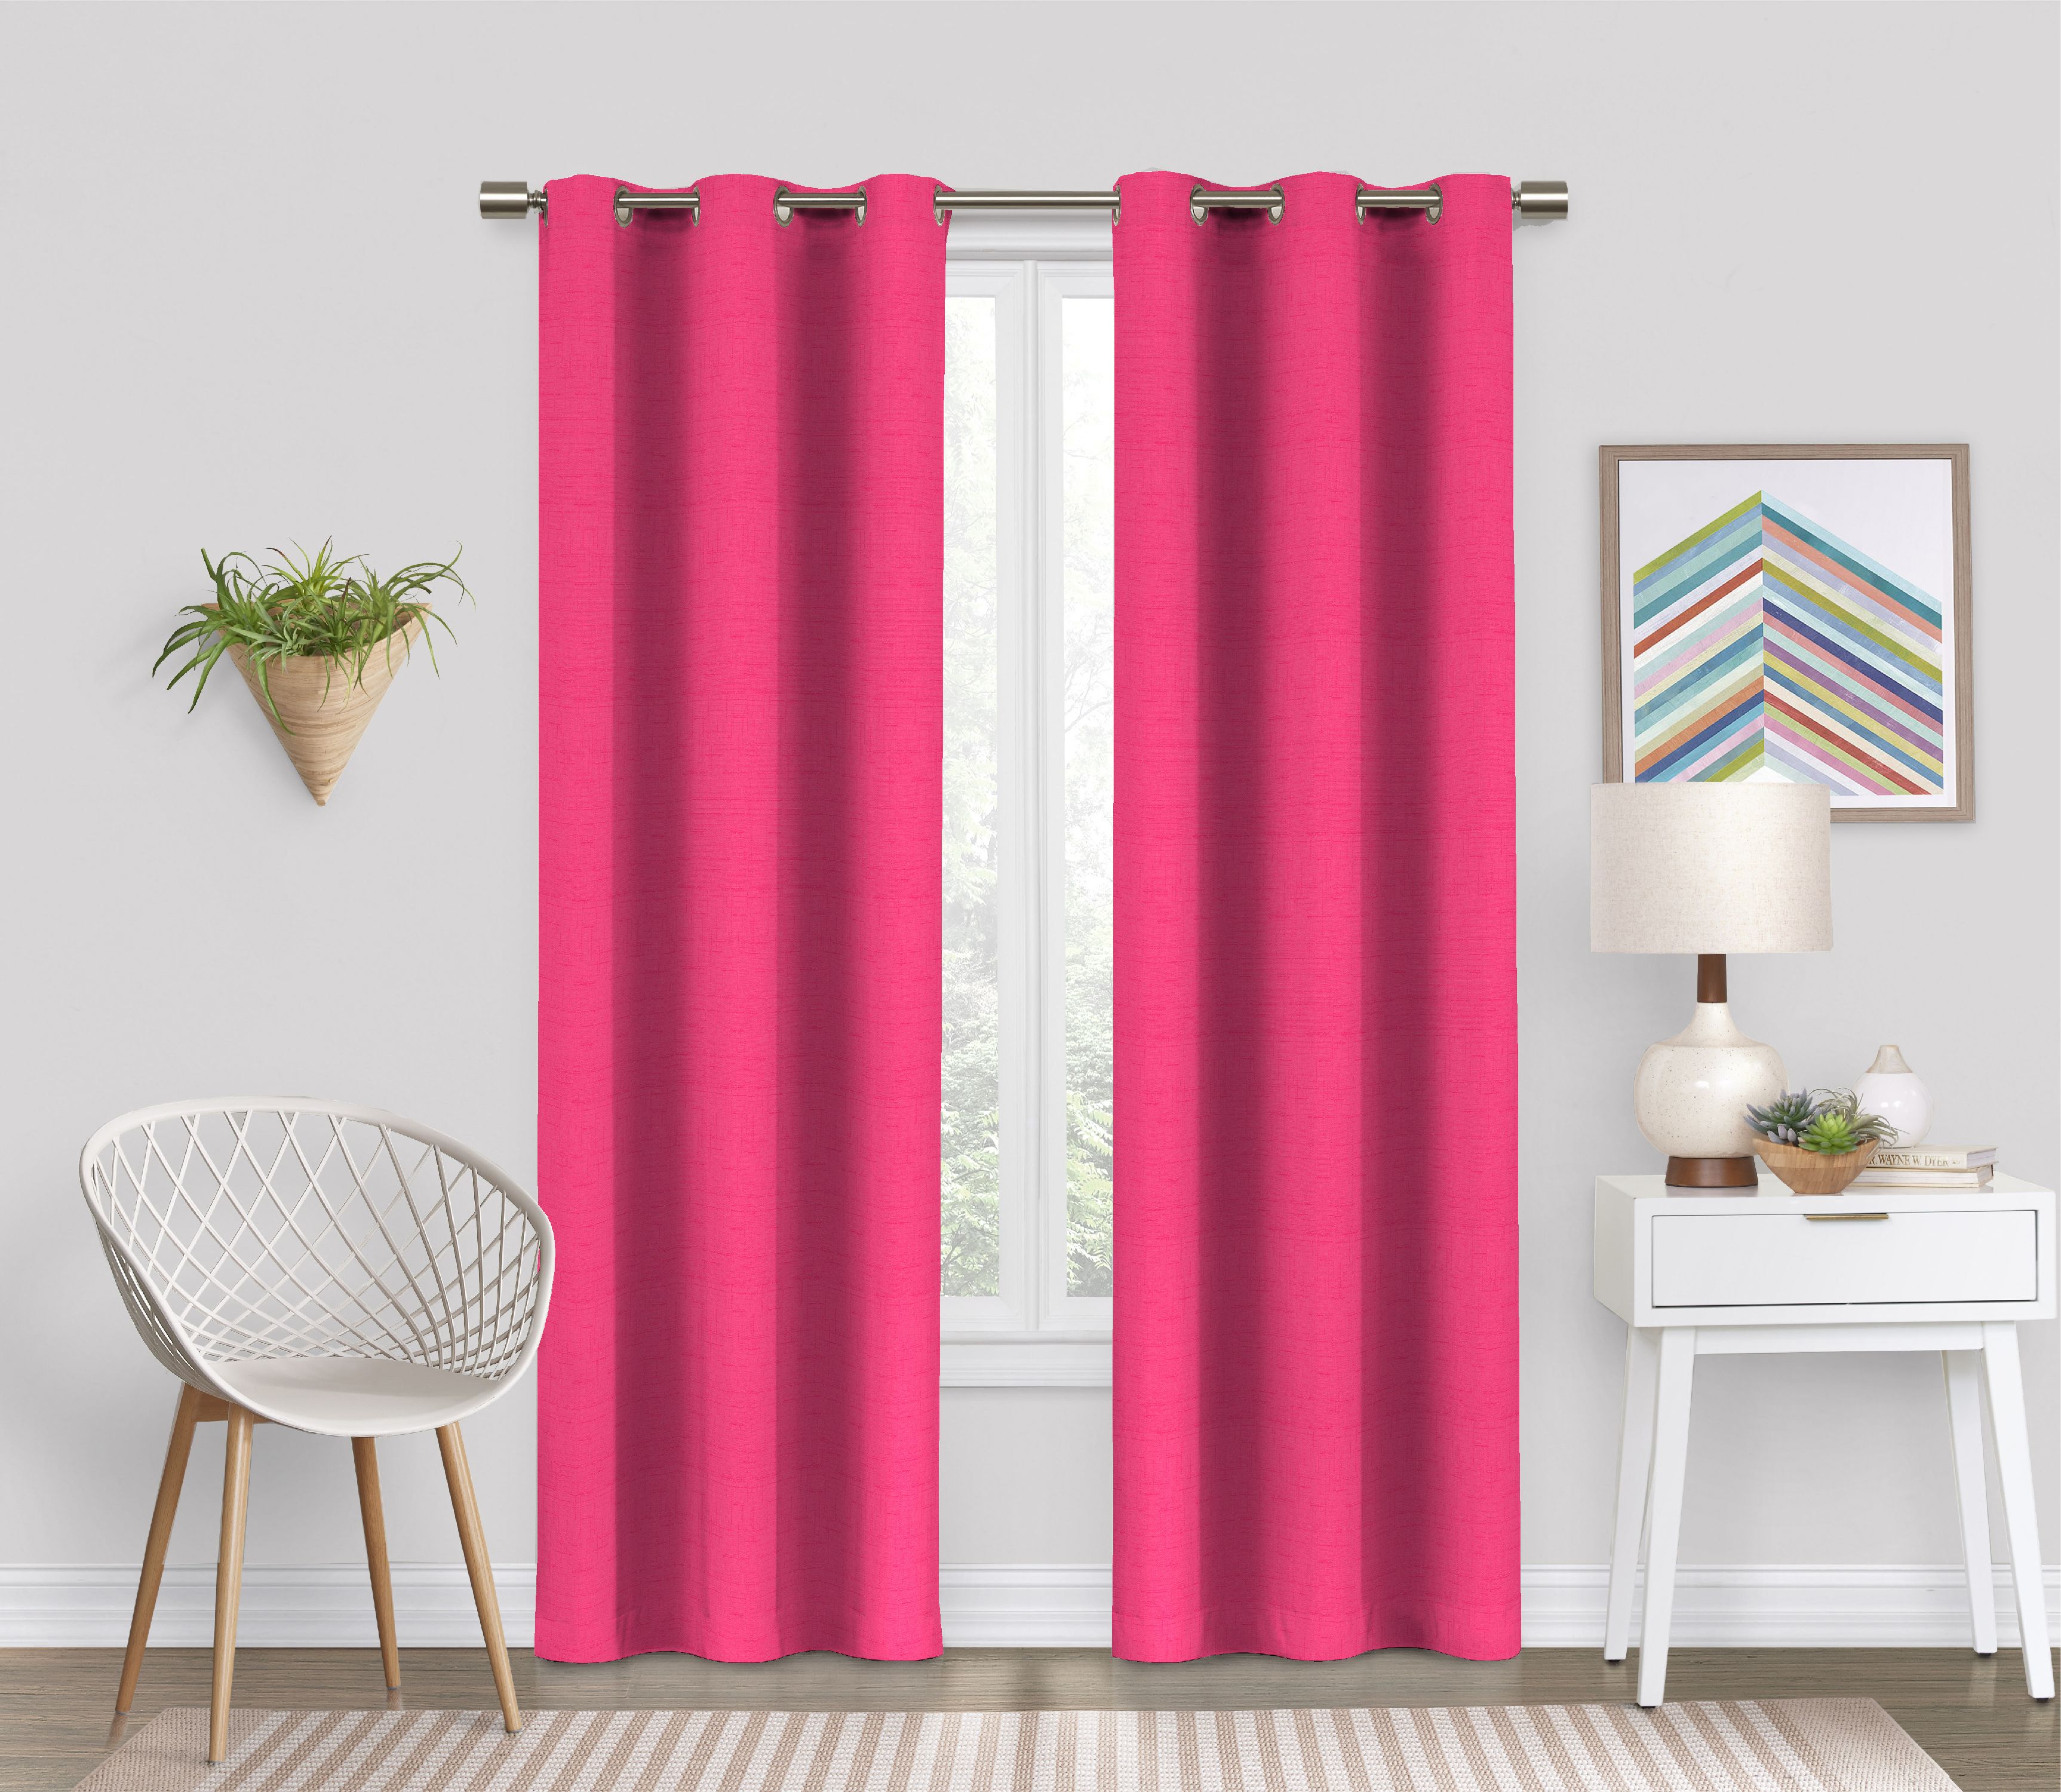 Eclipse Dayton Solid Color Blackout Grommet Single Curtain Panel, Pink, 42 x 63 - image 1 of 9